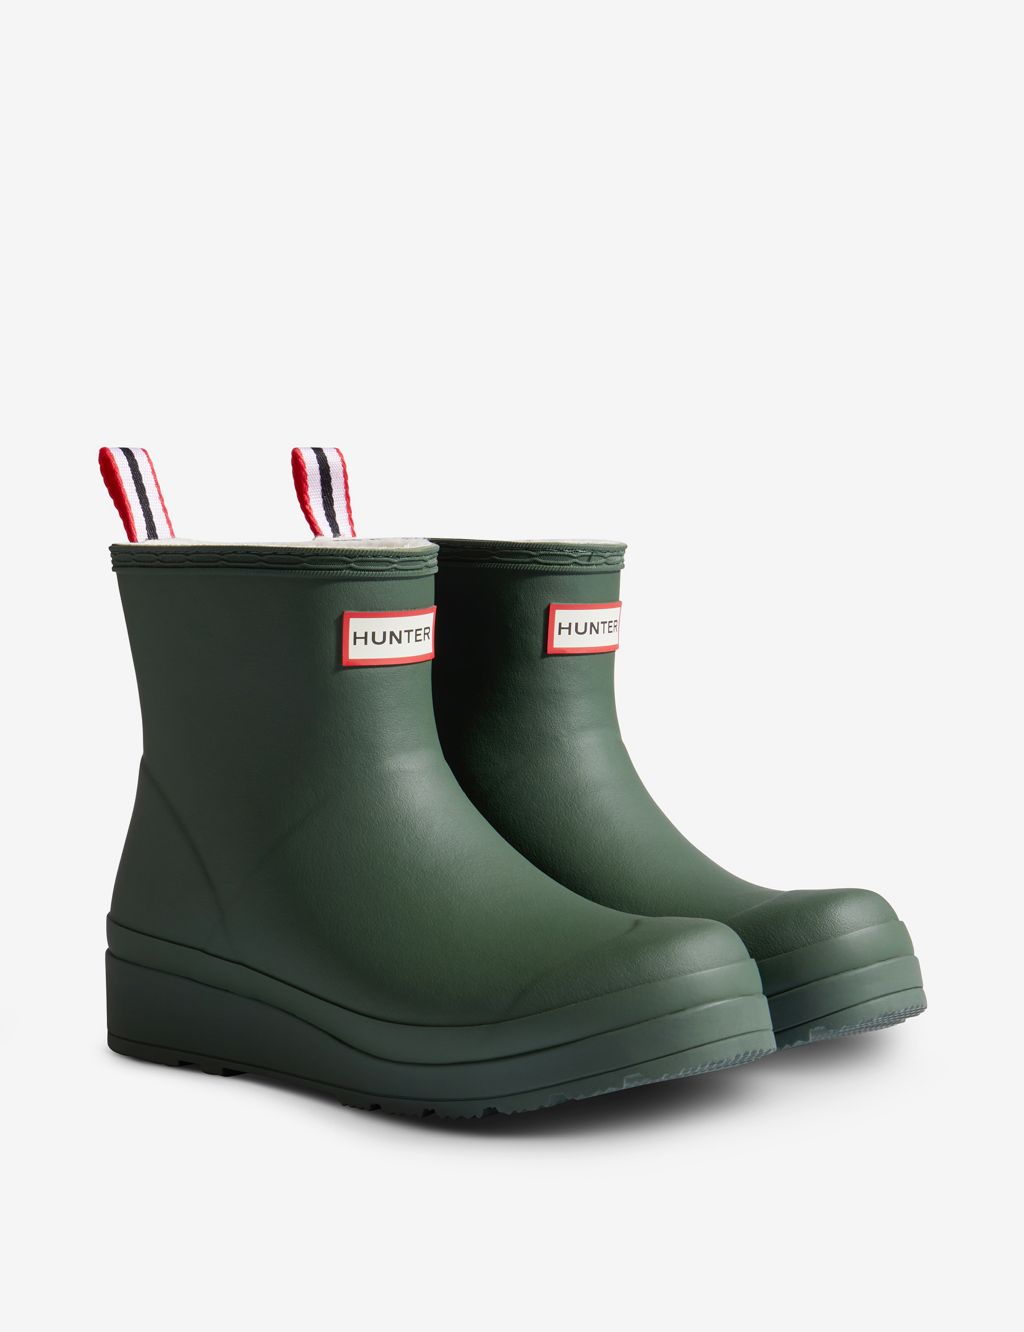 Short Insulated Wellies image 2